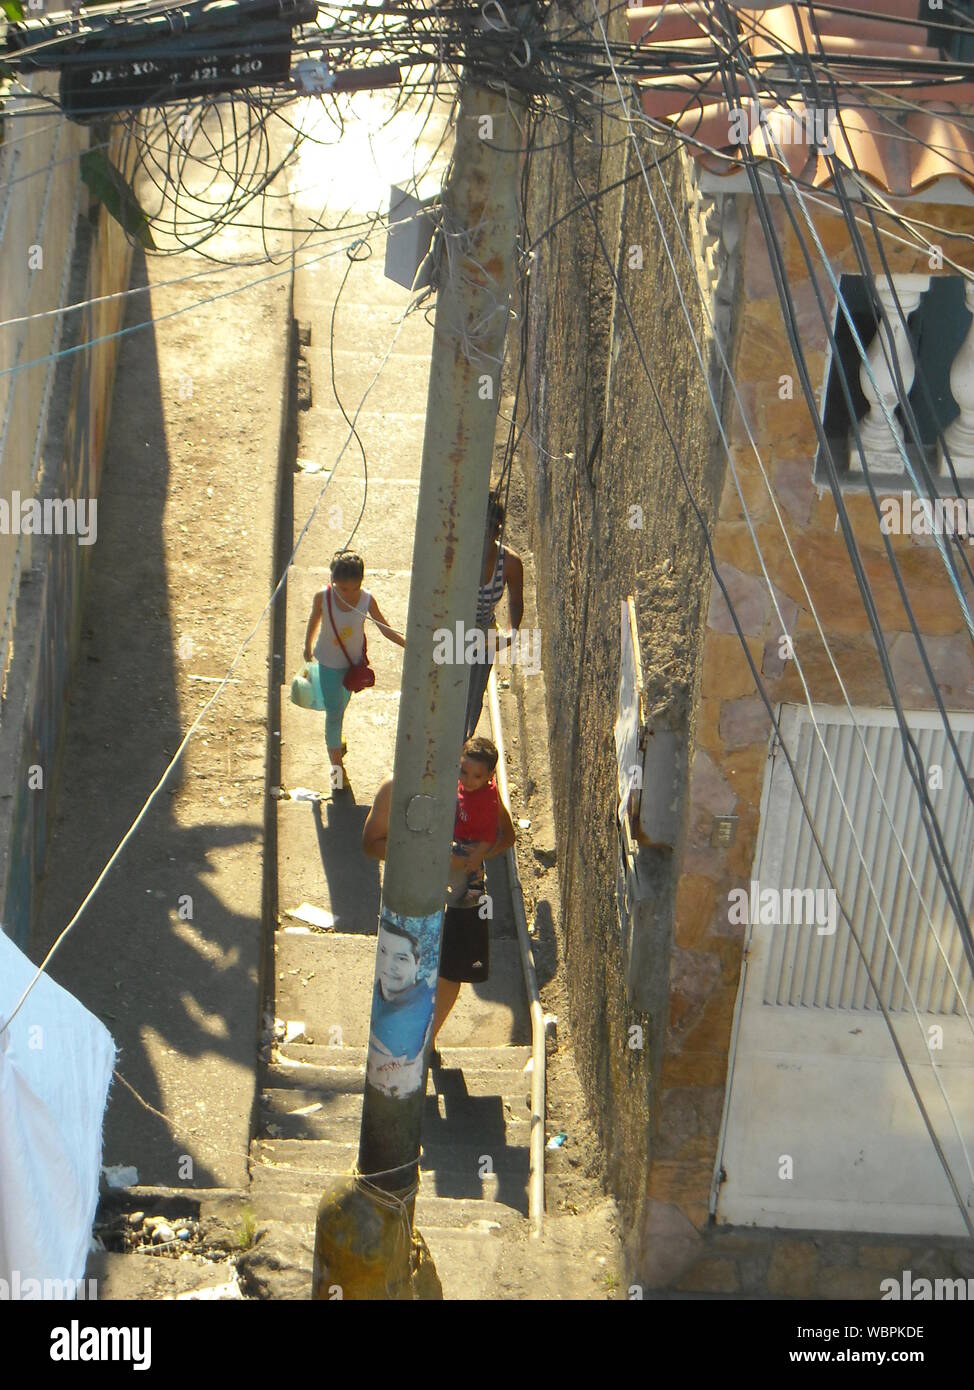 Venezuela, Caracas. Common spaces of the Petare neighborhood where precarious buildings and people doing their daily lives are observed. Stock Photo